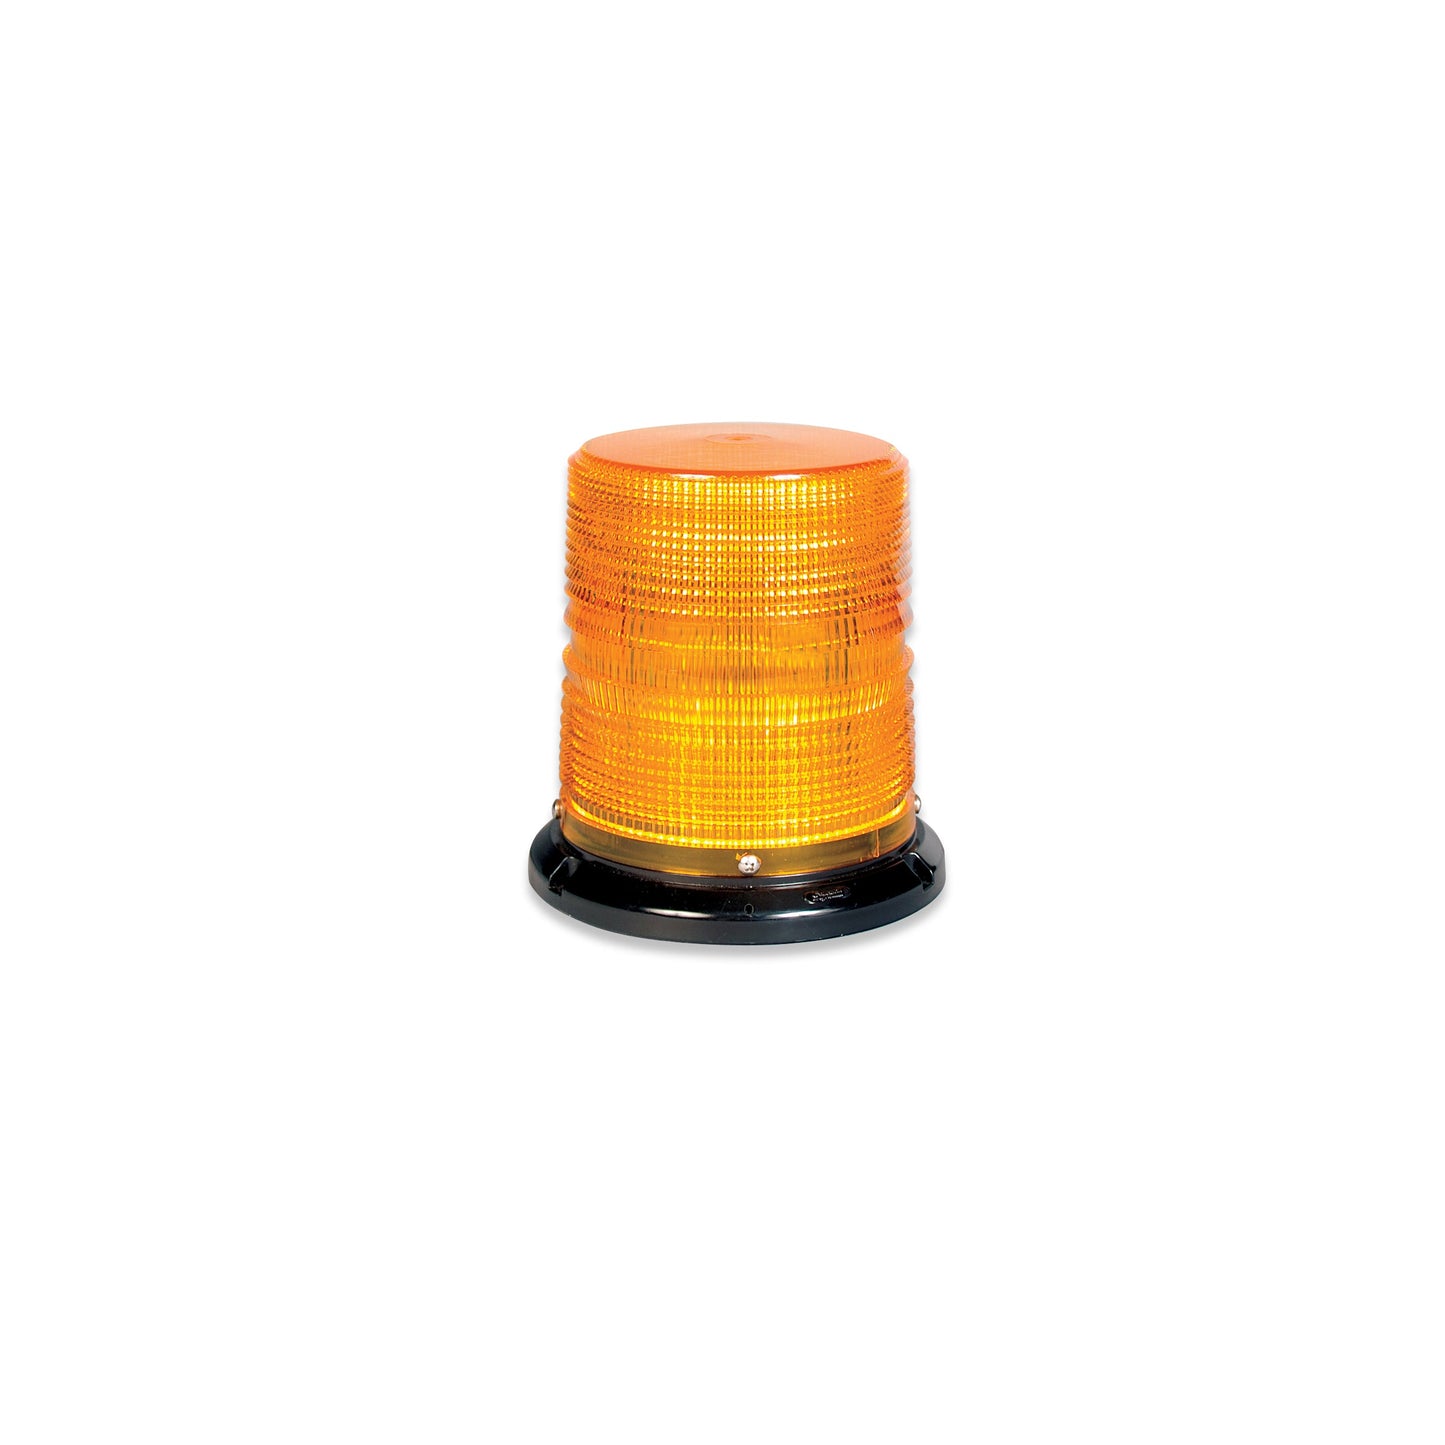 Soundoff Signal ELB45BCL0FC 4500 Series Led Beacon, 10-30V, Sae J845 Class 1 - Flat/Pipe Mount, 4" Clear Dome & Amber/White Leds